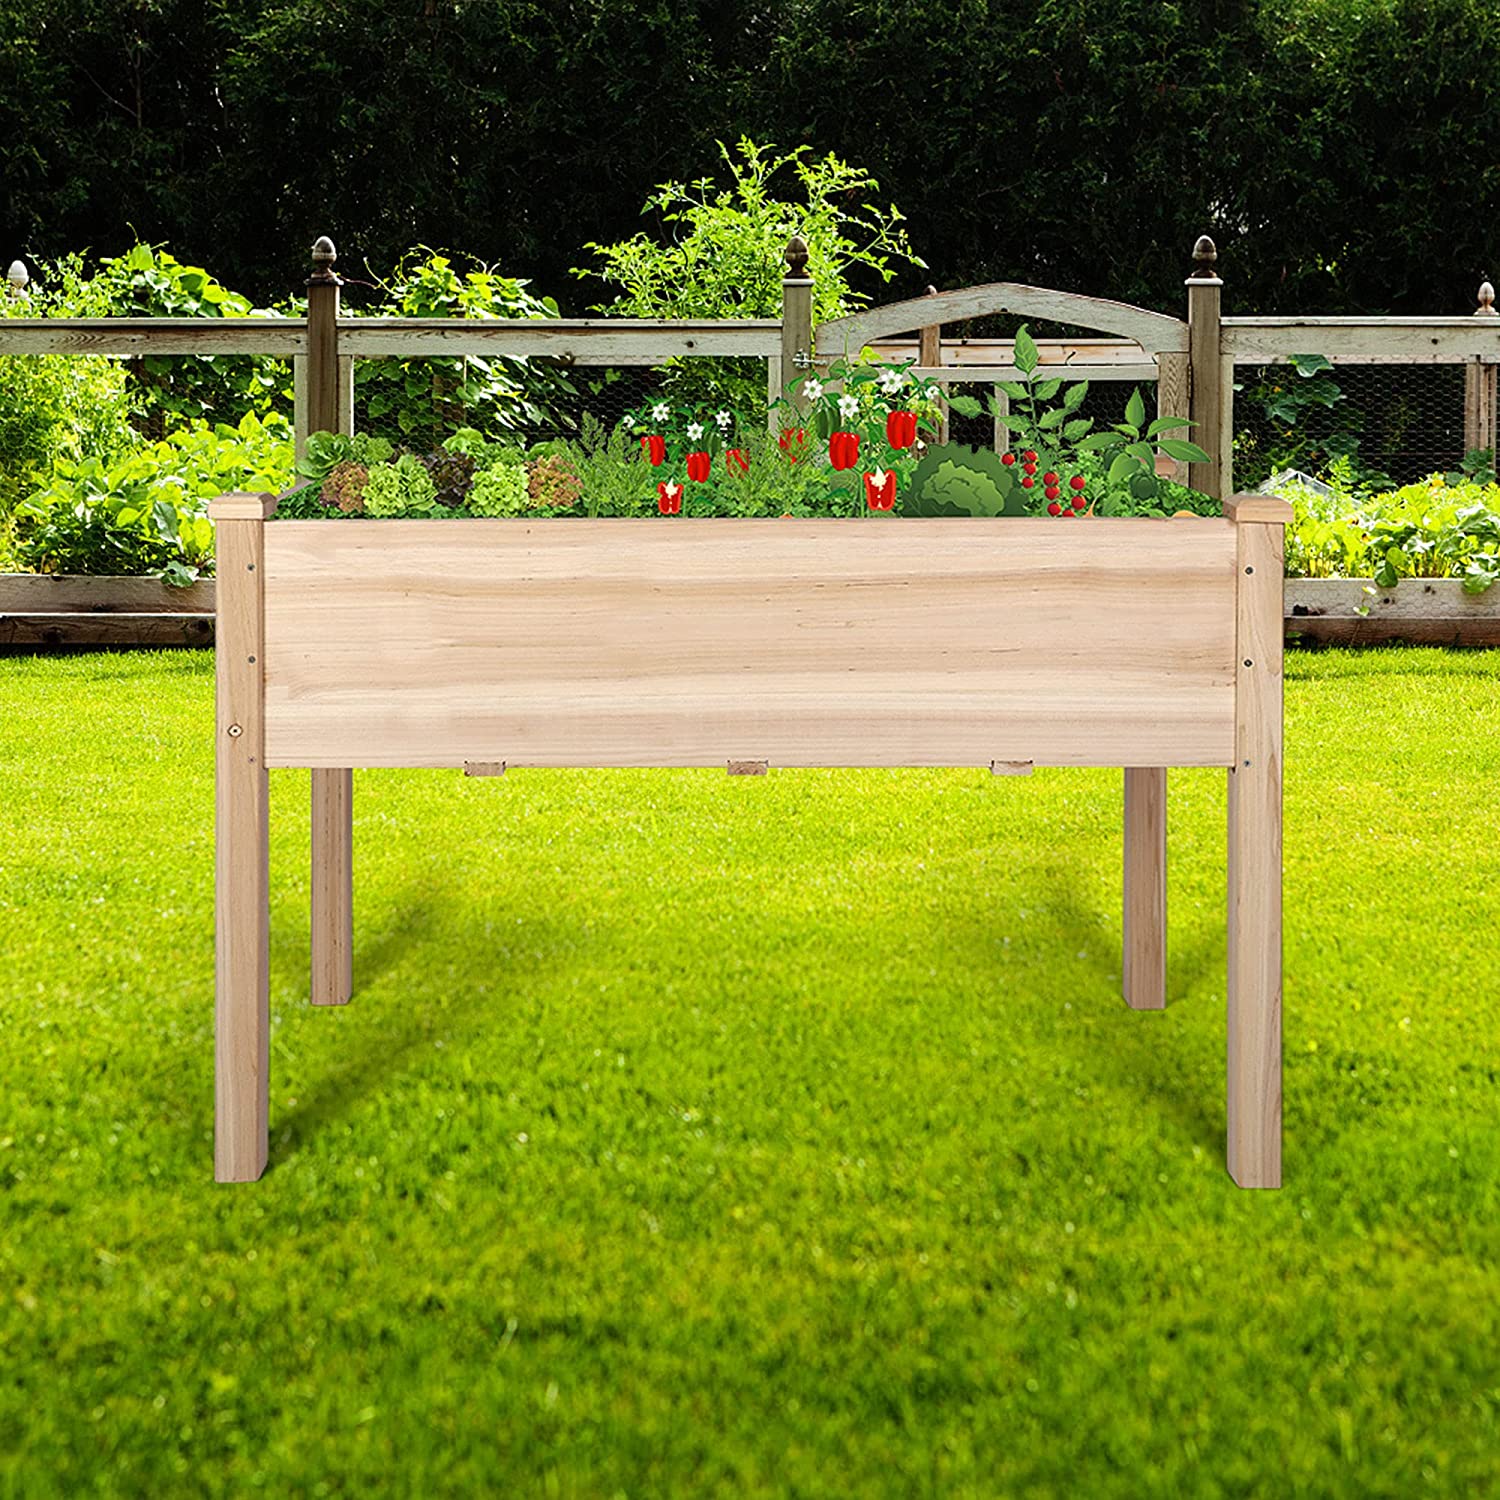 Wooden Raised Garden Bed 47.2" x 21.6" x 29.5" Elevated Wood Planter Box with Legs